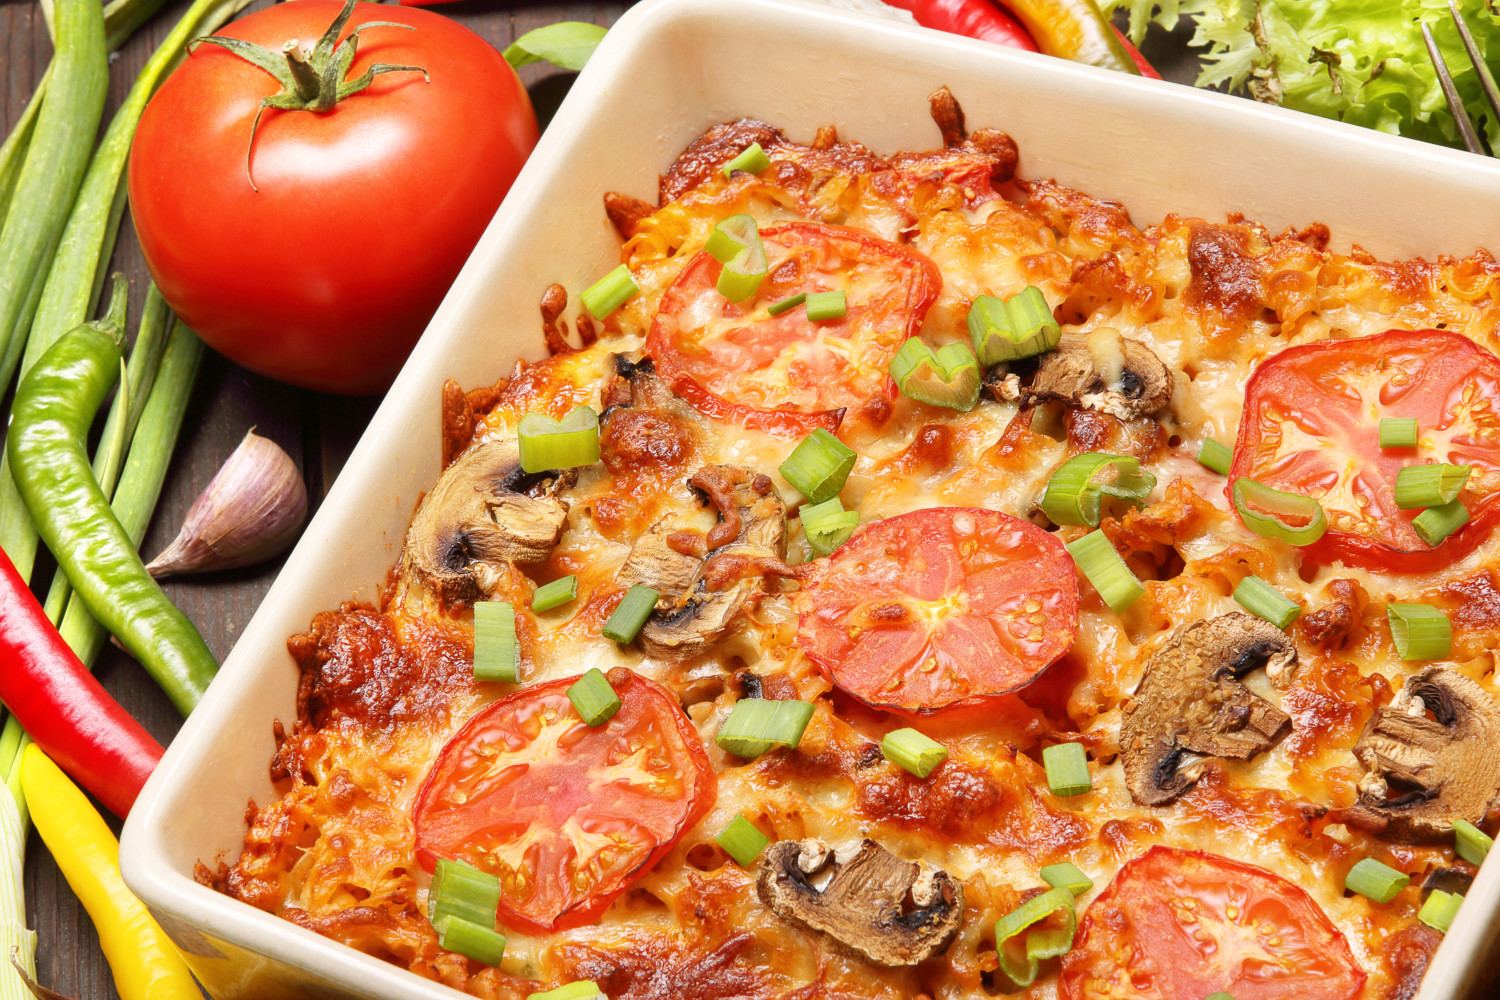 Casserole with tomato and mushrooms on a wooden background